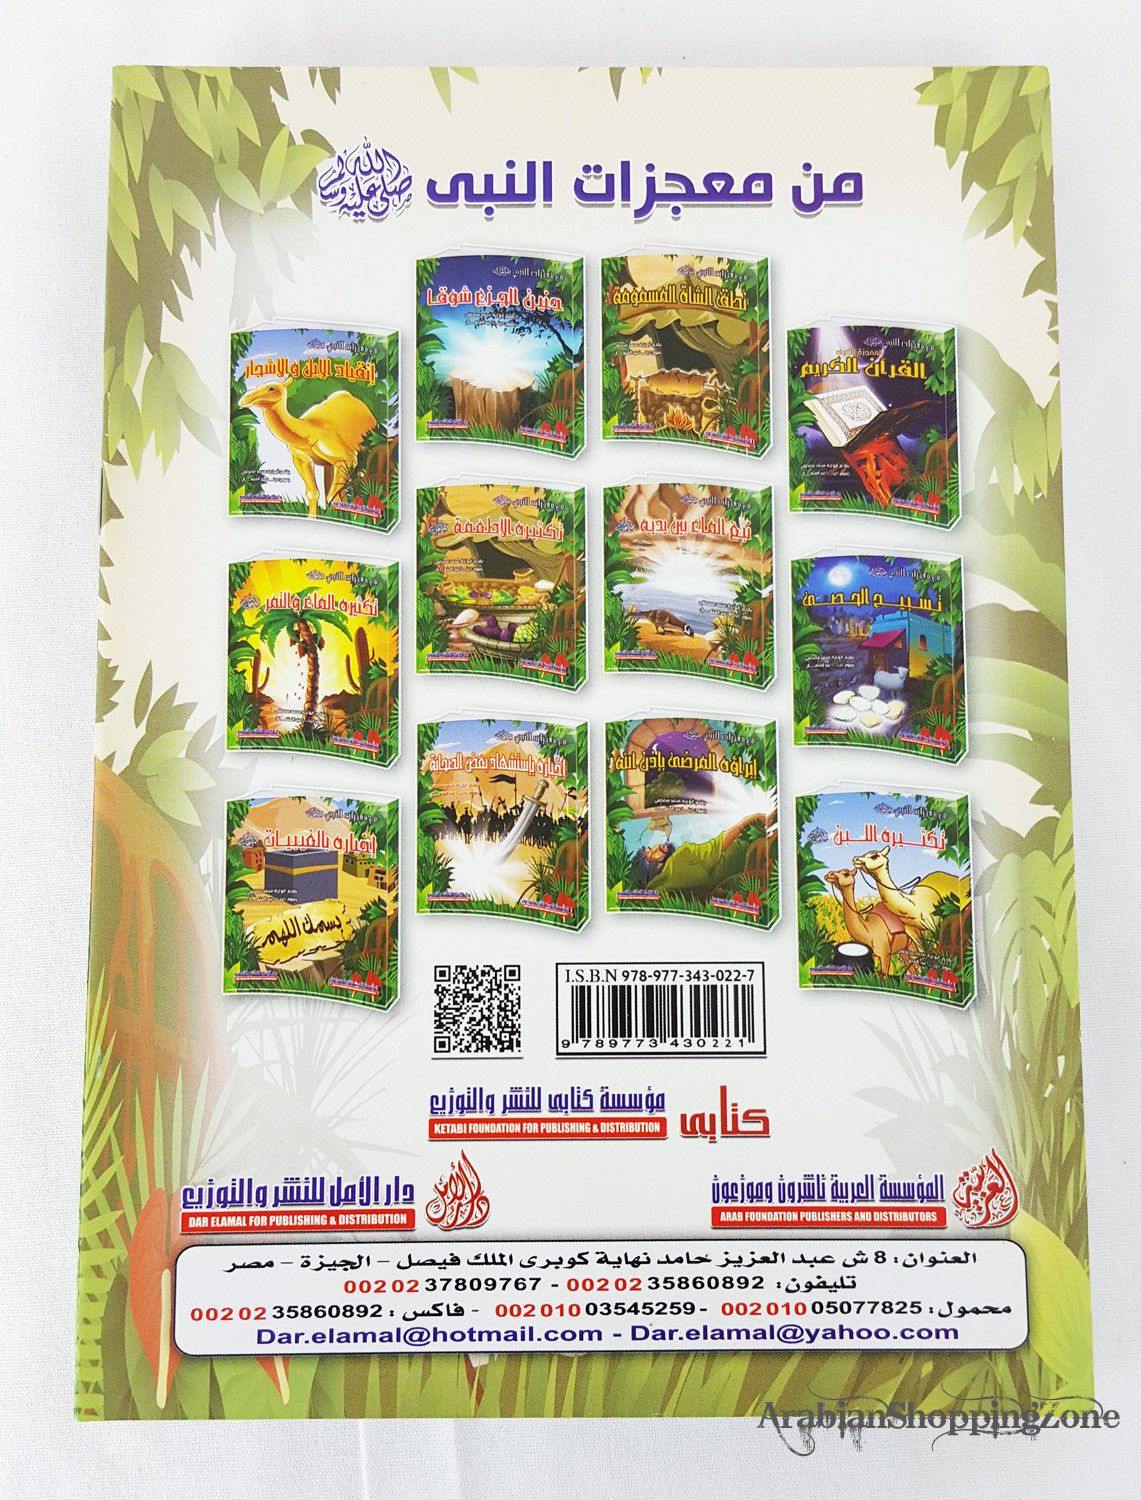 Miracles of the Prophet (23*16cm) (Arabic only) - Arabian Shopping Zone